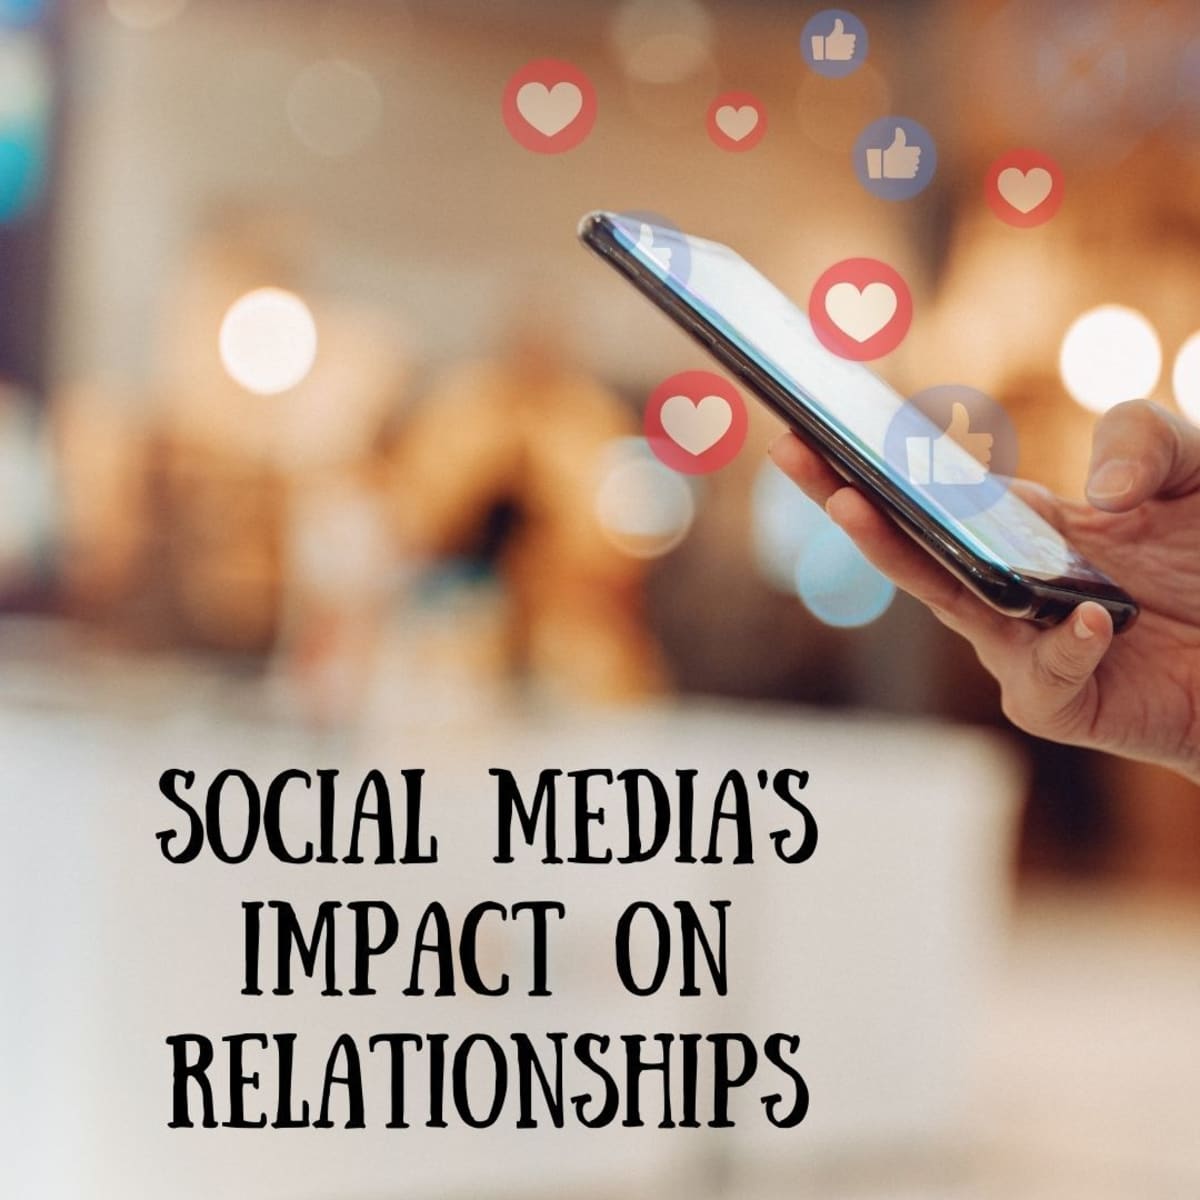 The Influence of Social Media and Technology on Human Relationships